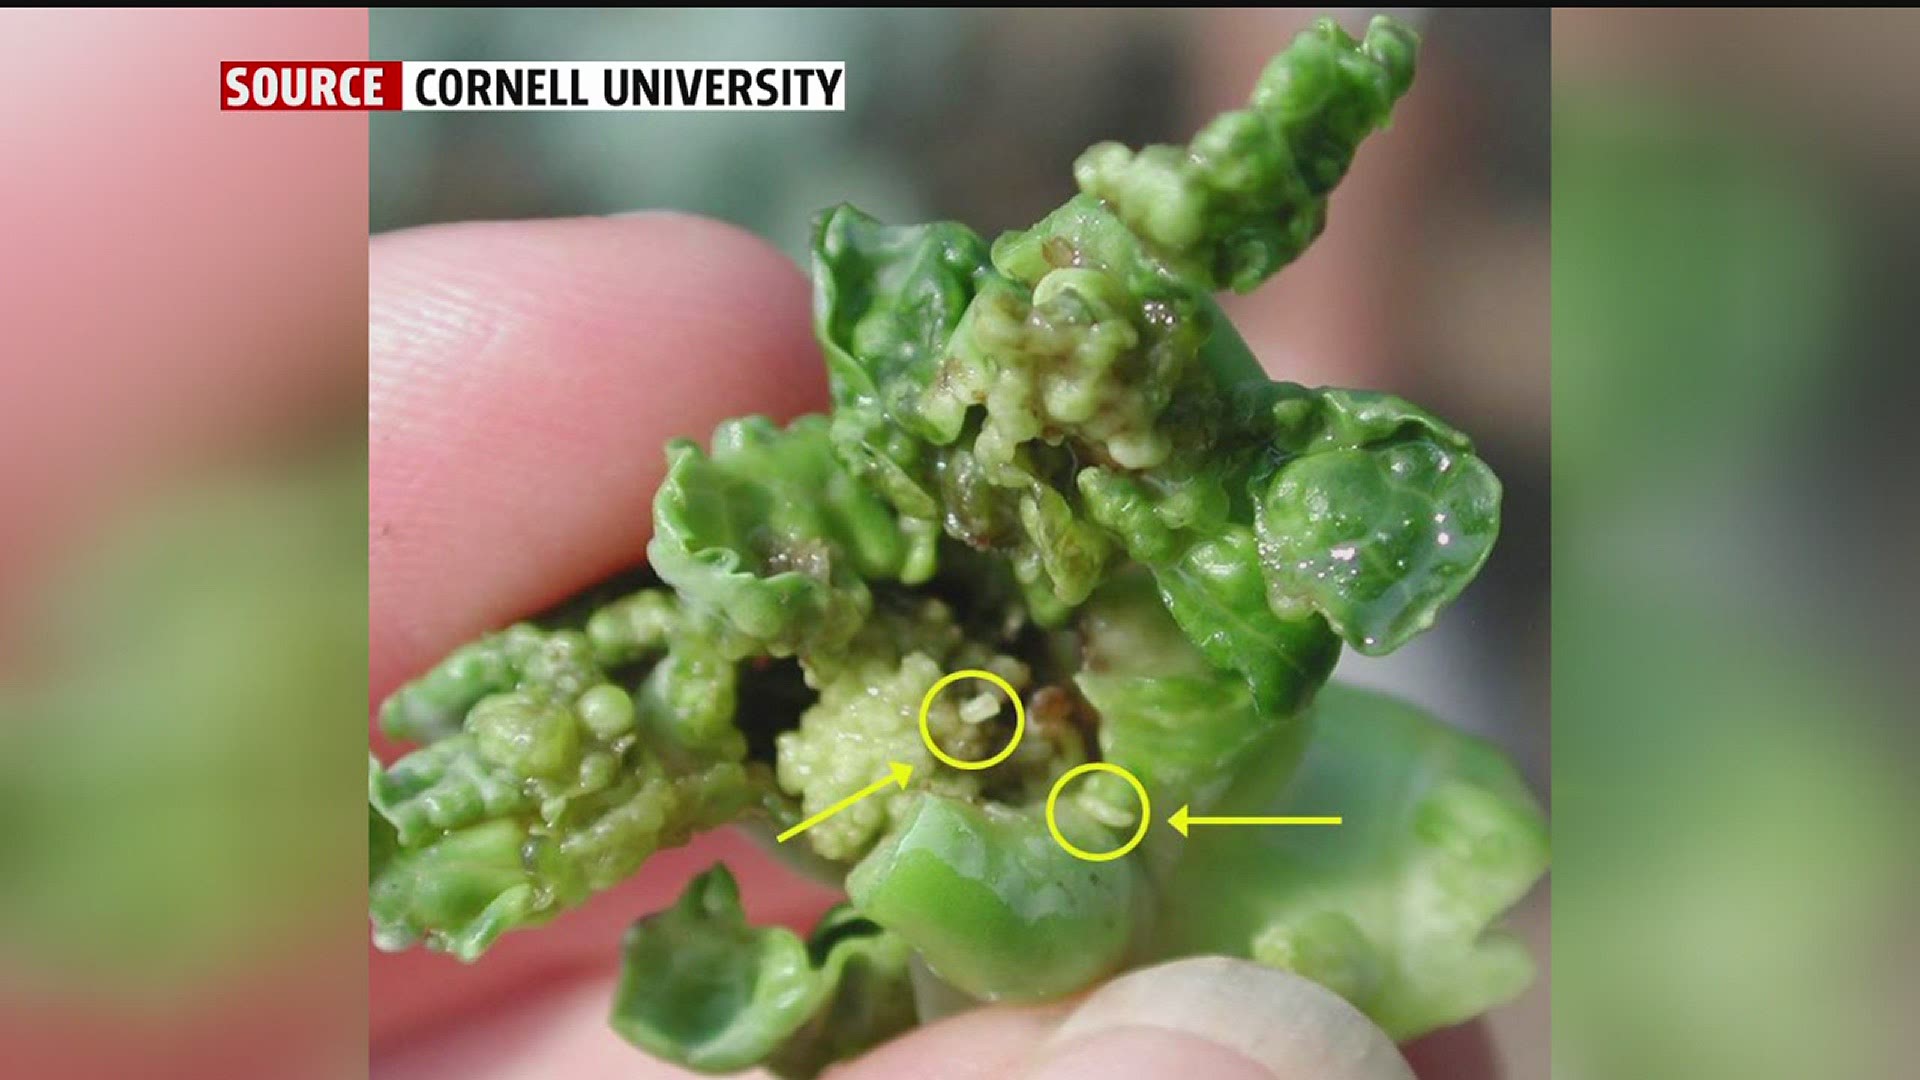 Damage done to broccoli plants by this invasive species was confirmed earlier this month on a farm in Bradford County.